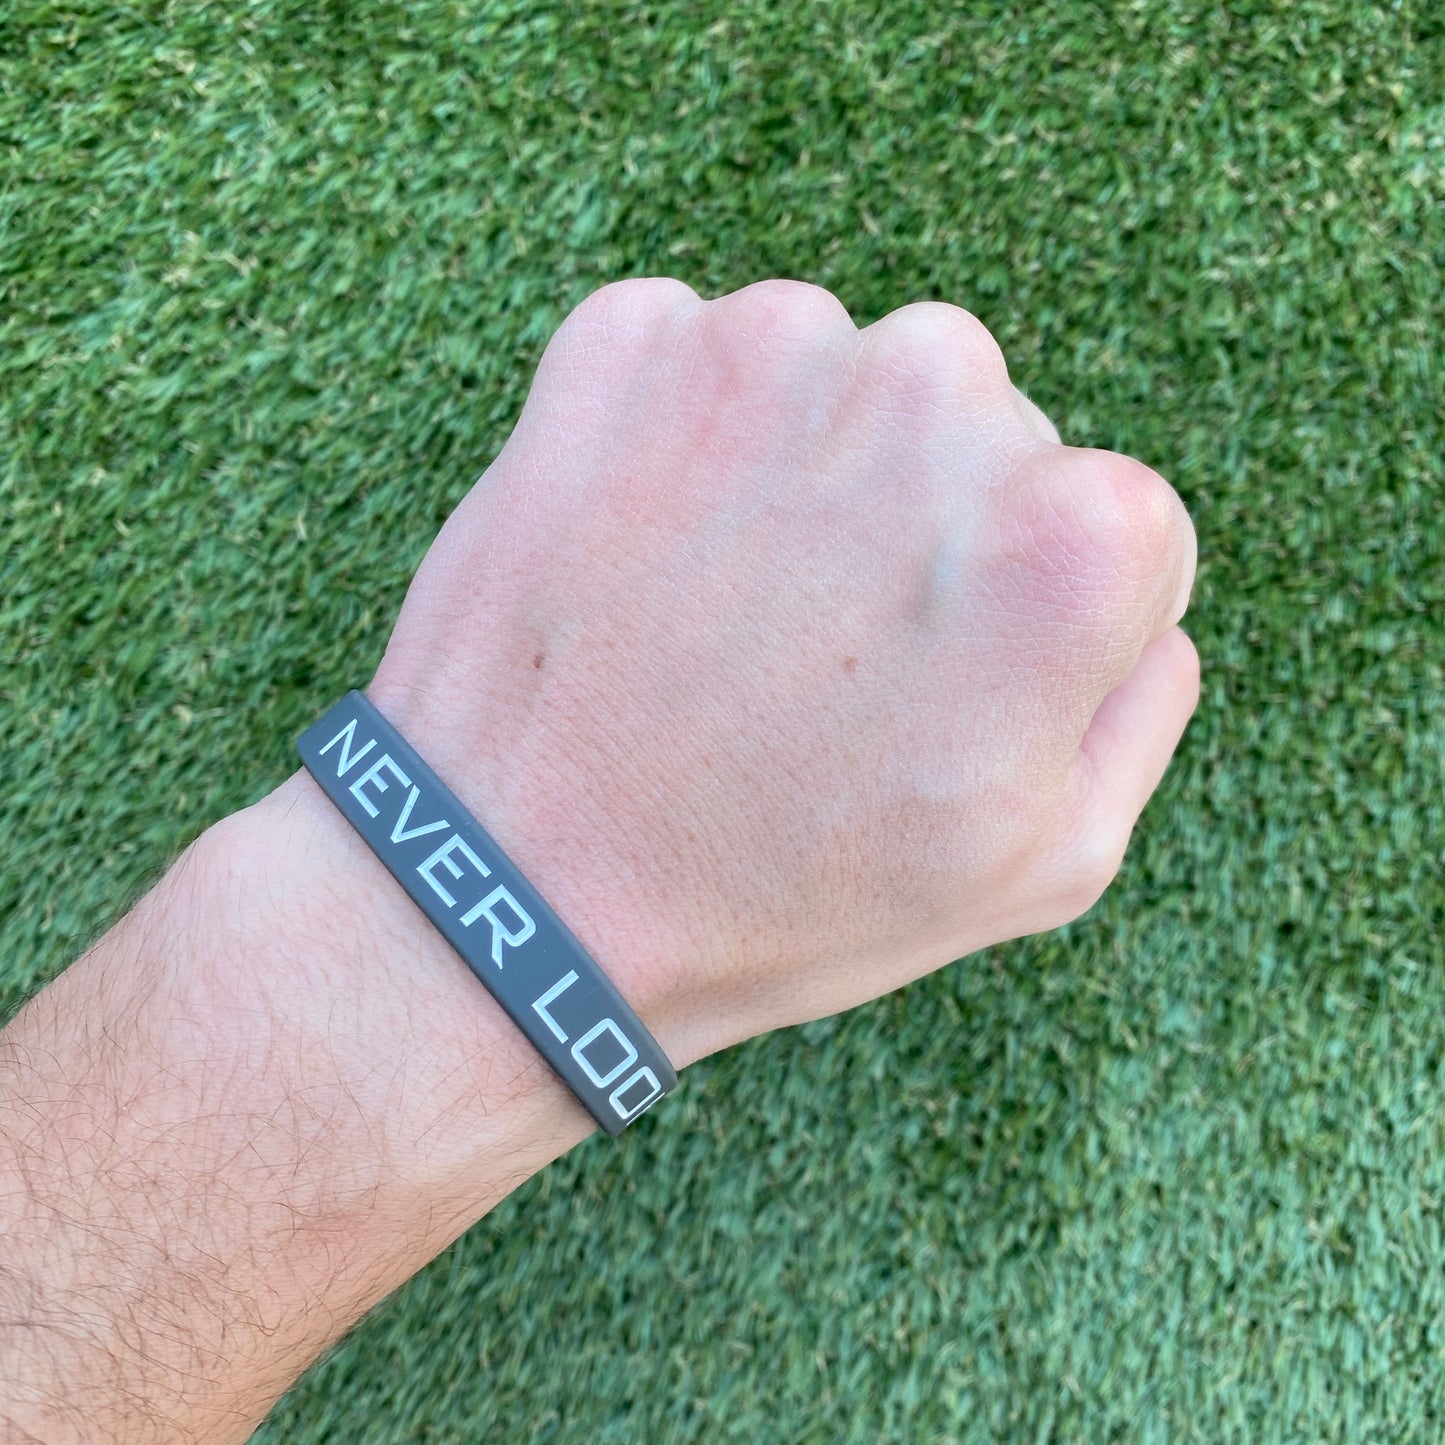 NEVER LOOK BACK Wristband